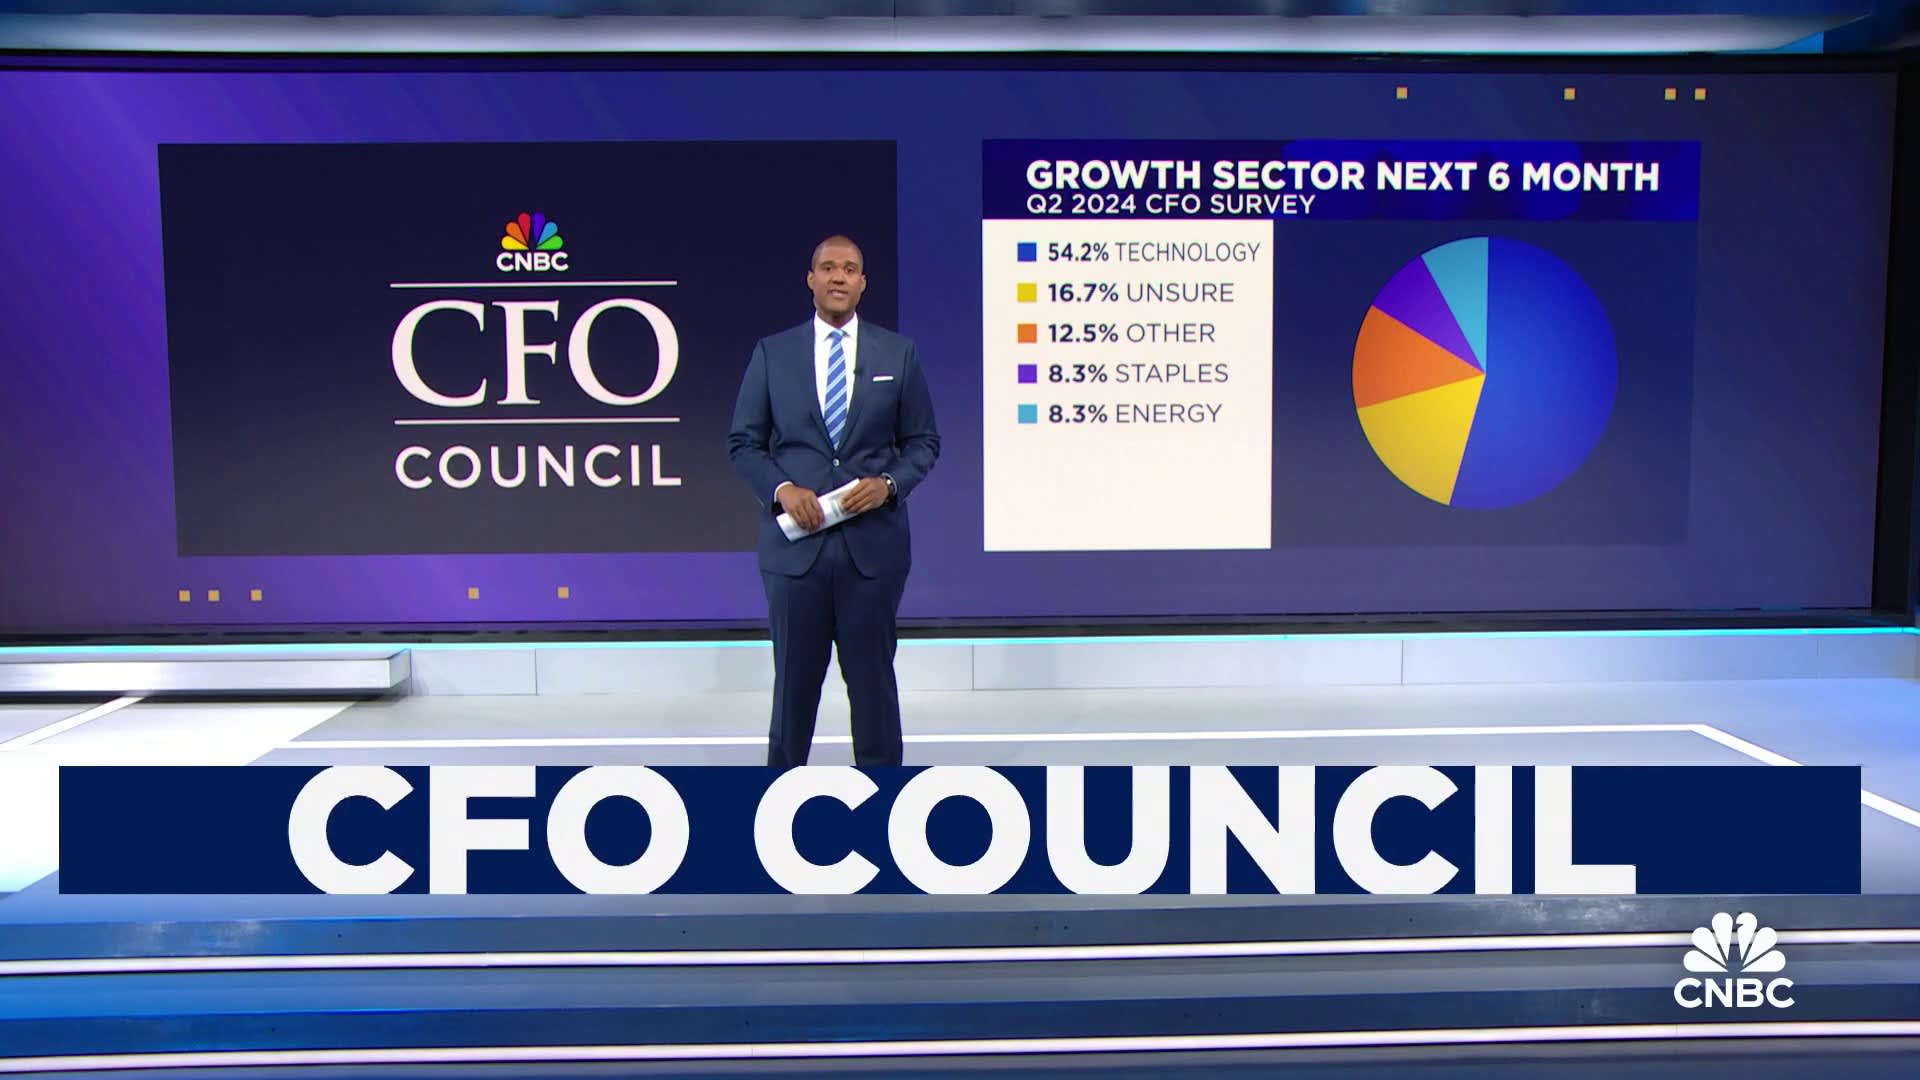 Tech poised for growth in 2024: CNBC CFO Council survey